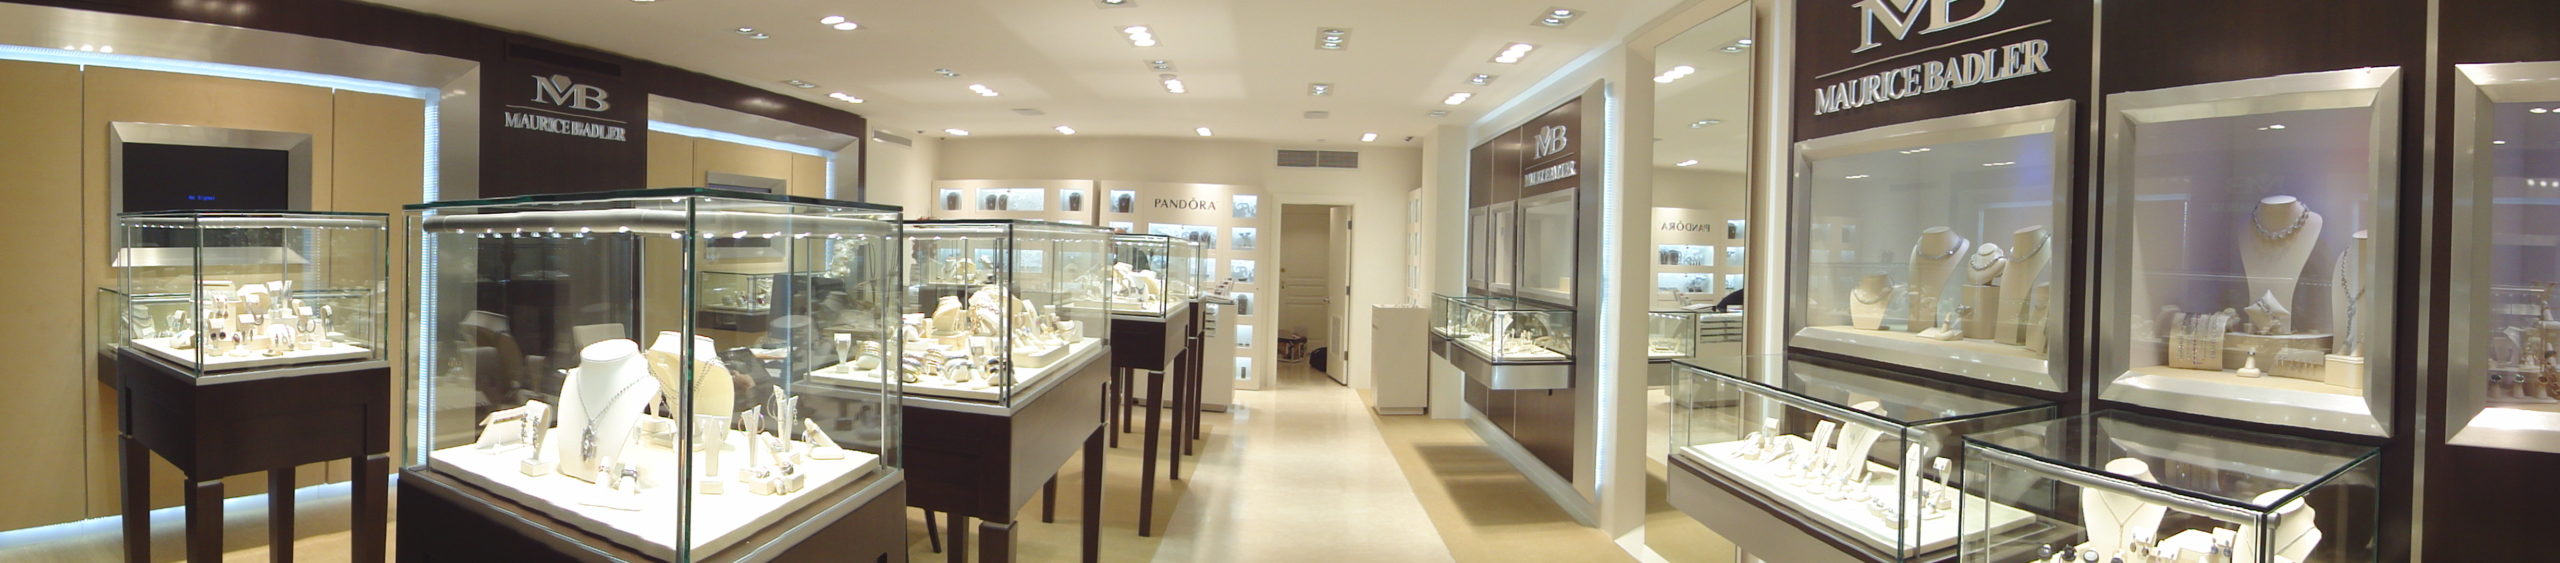 Wide-angle displaying three glass jewelry cases and two counters